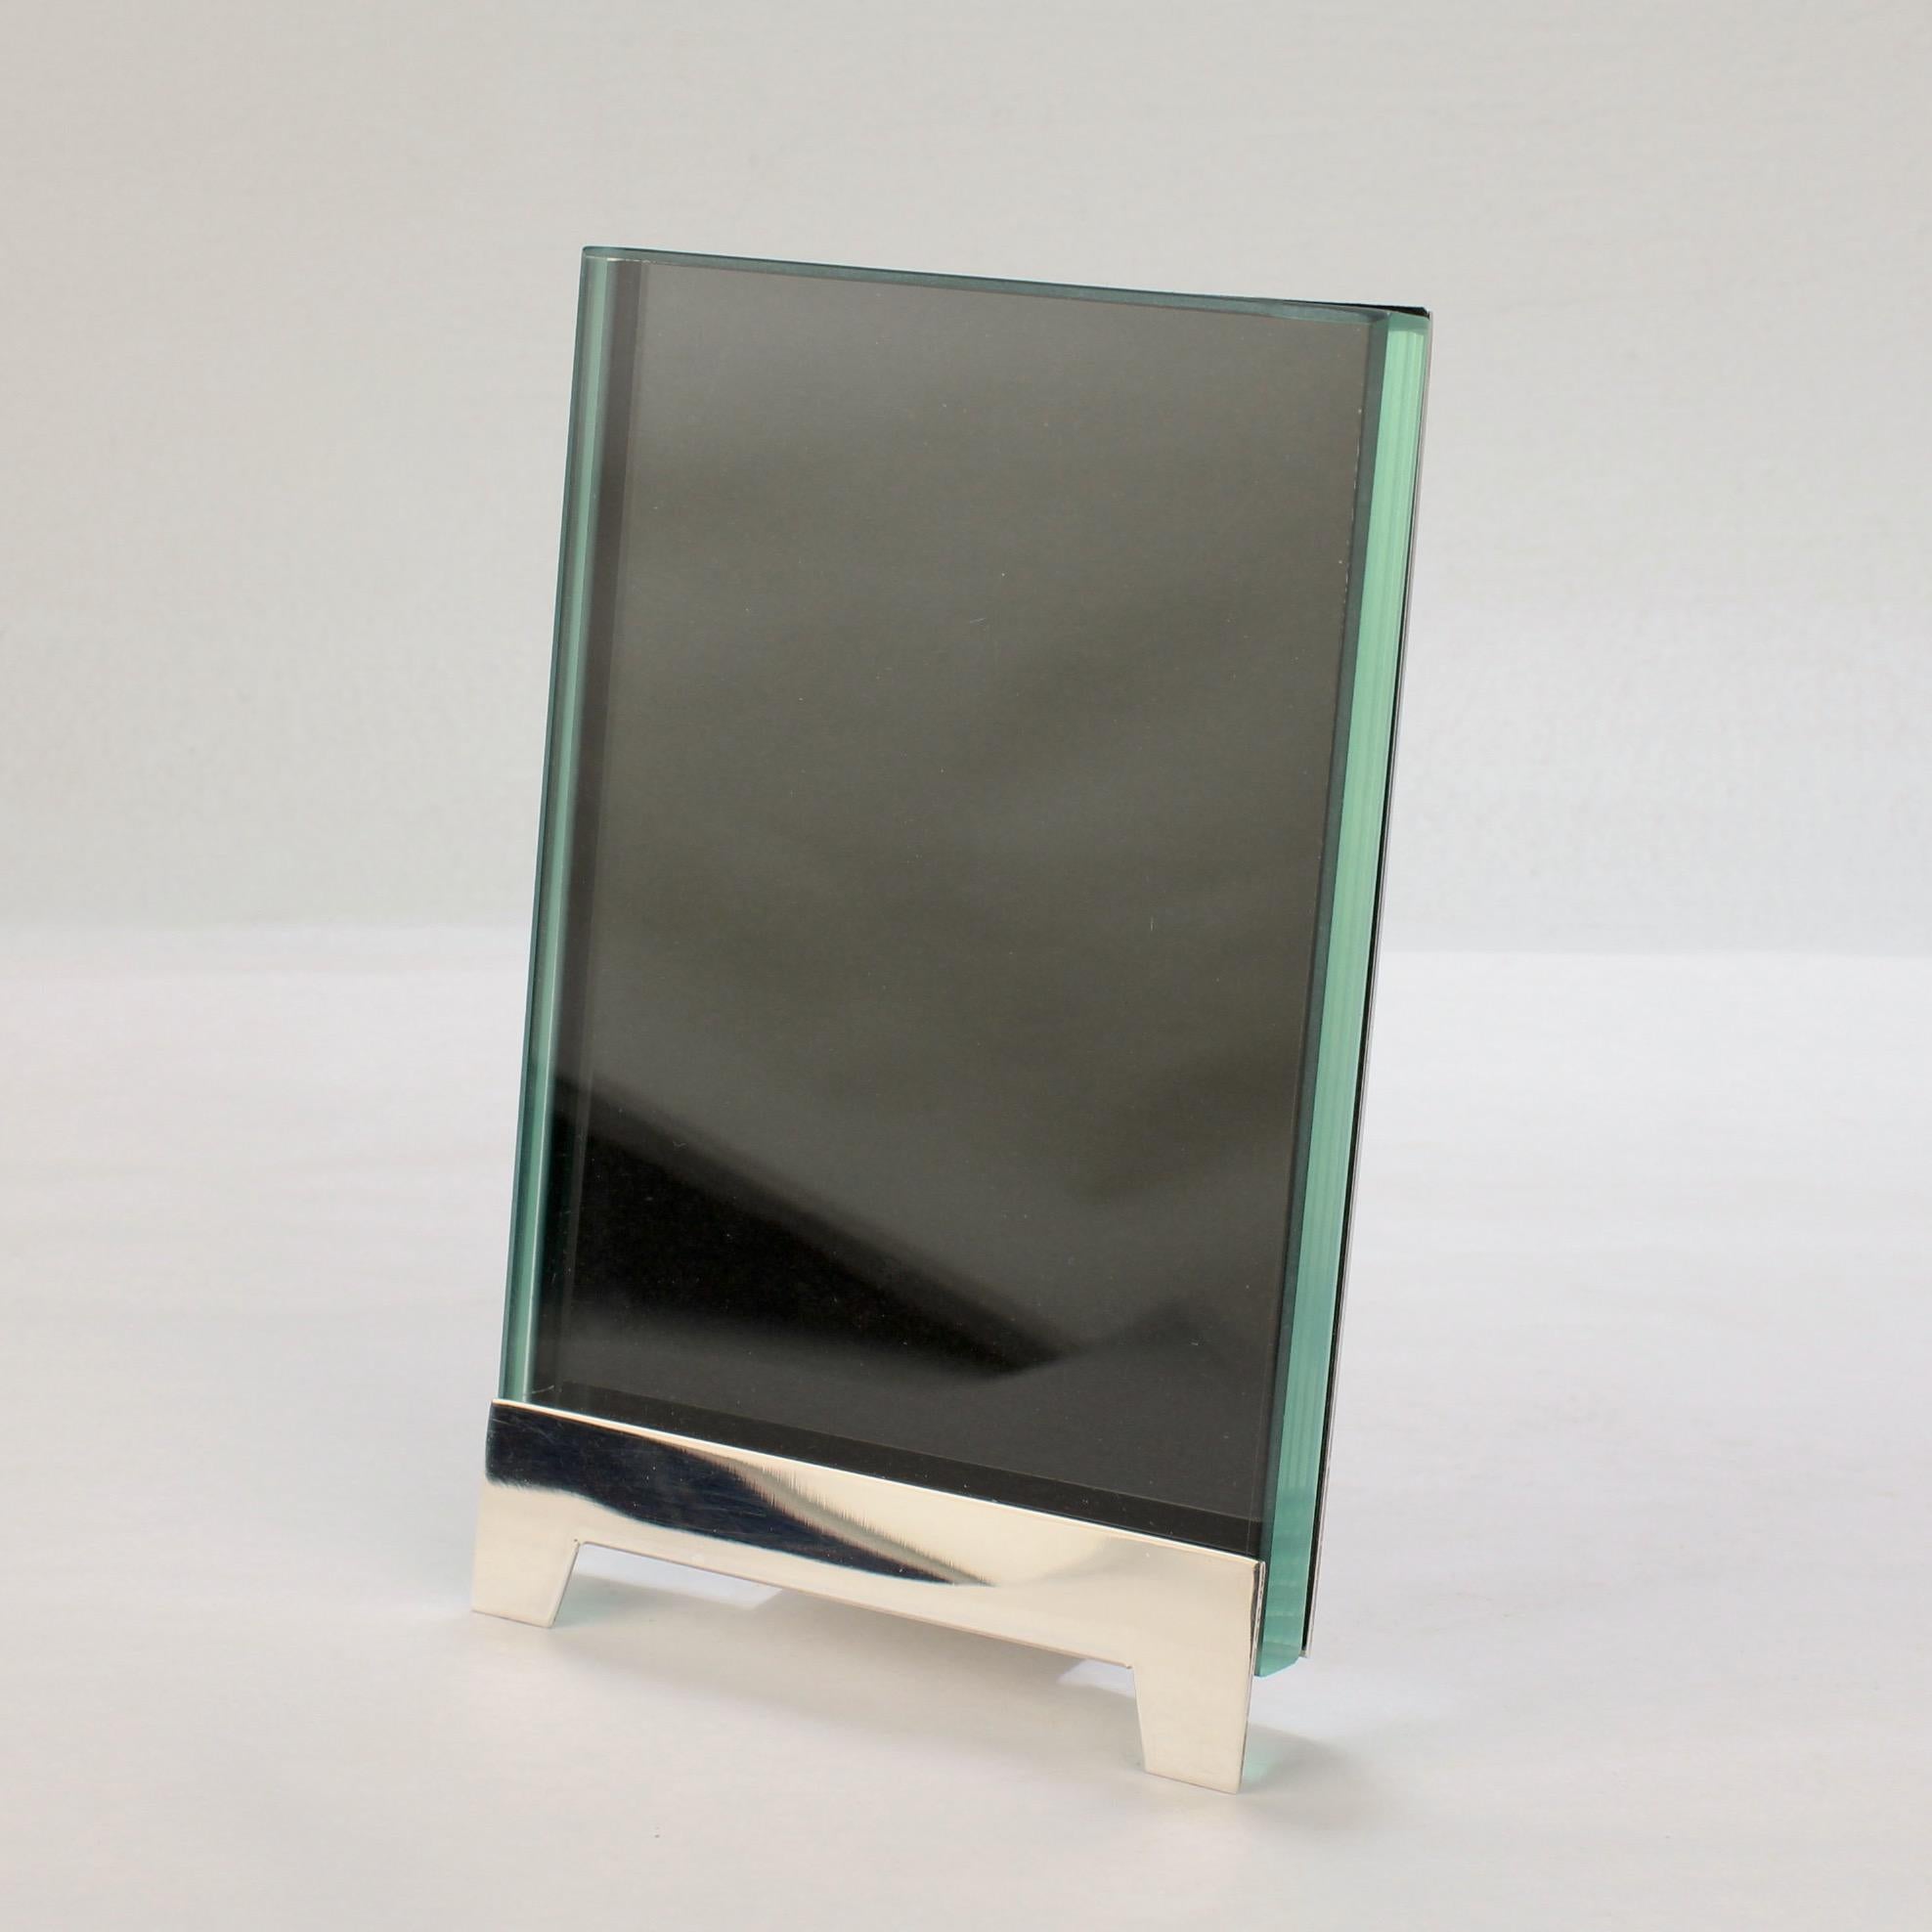 A wonderful postmodern silver-plated easel back frame.

Designed by TsAO & Mckown for Swid Powell.

Model no. 3311 - entitled the 